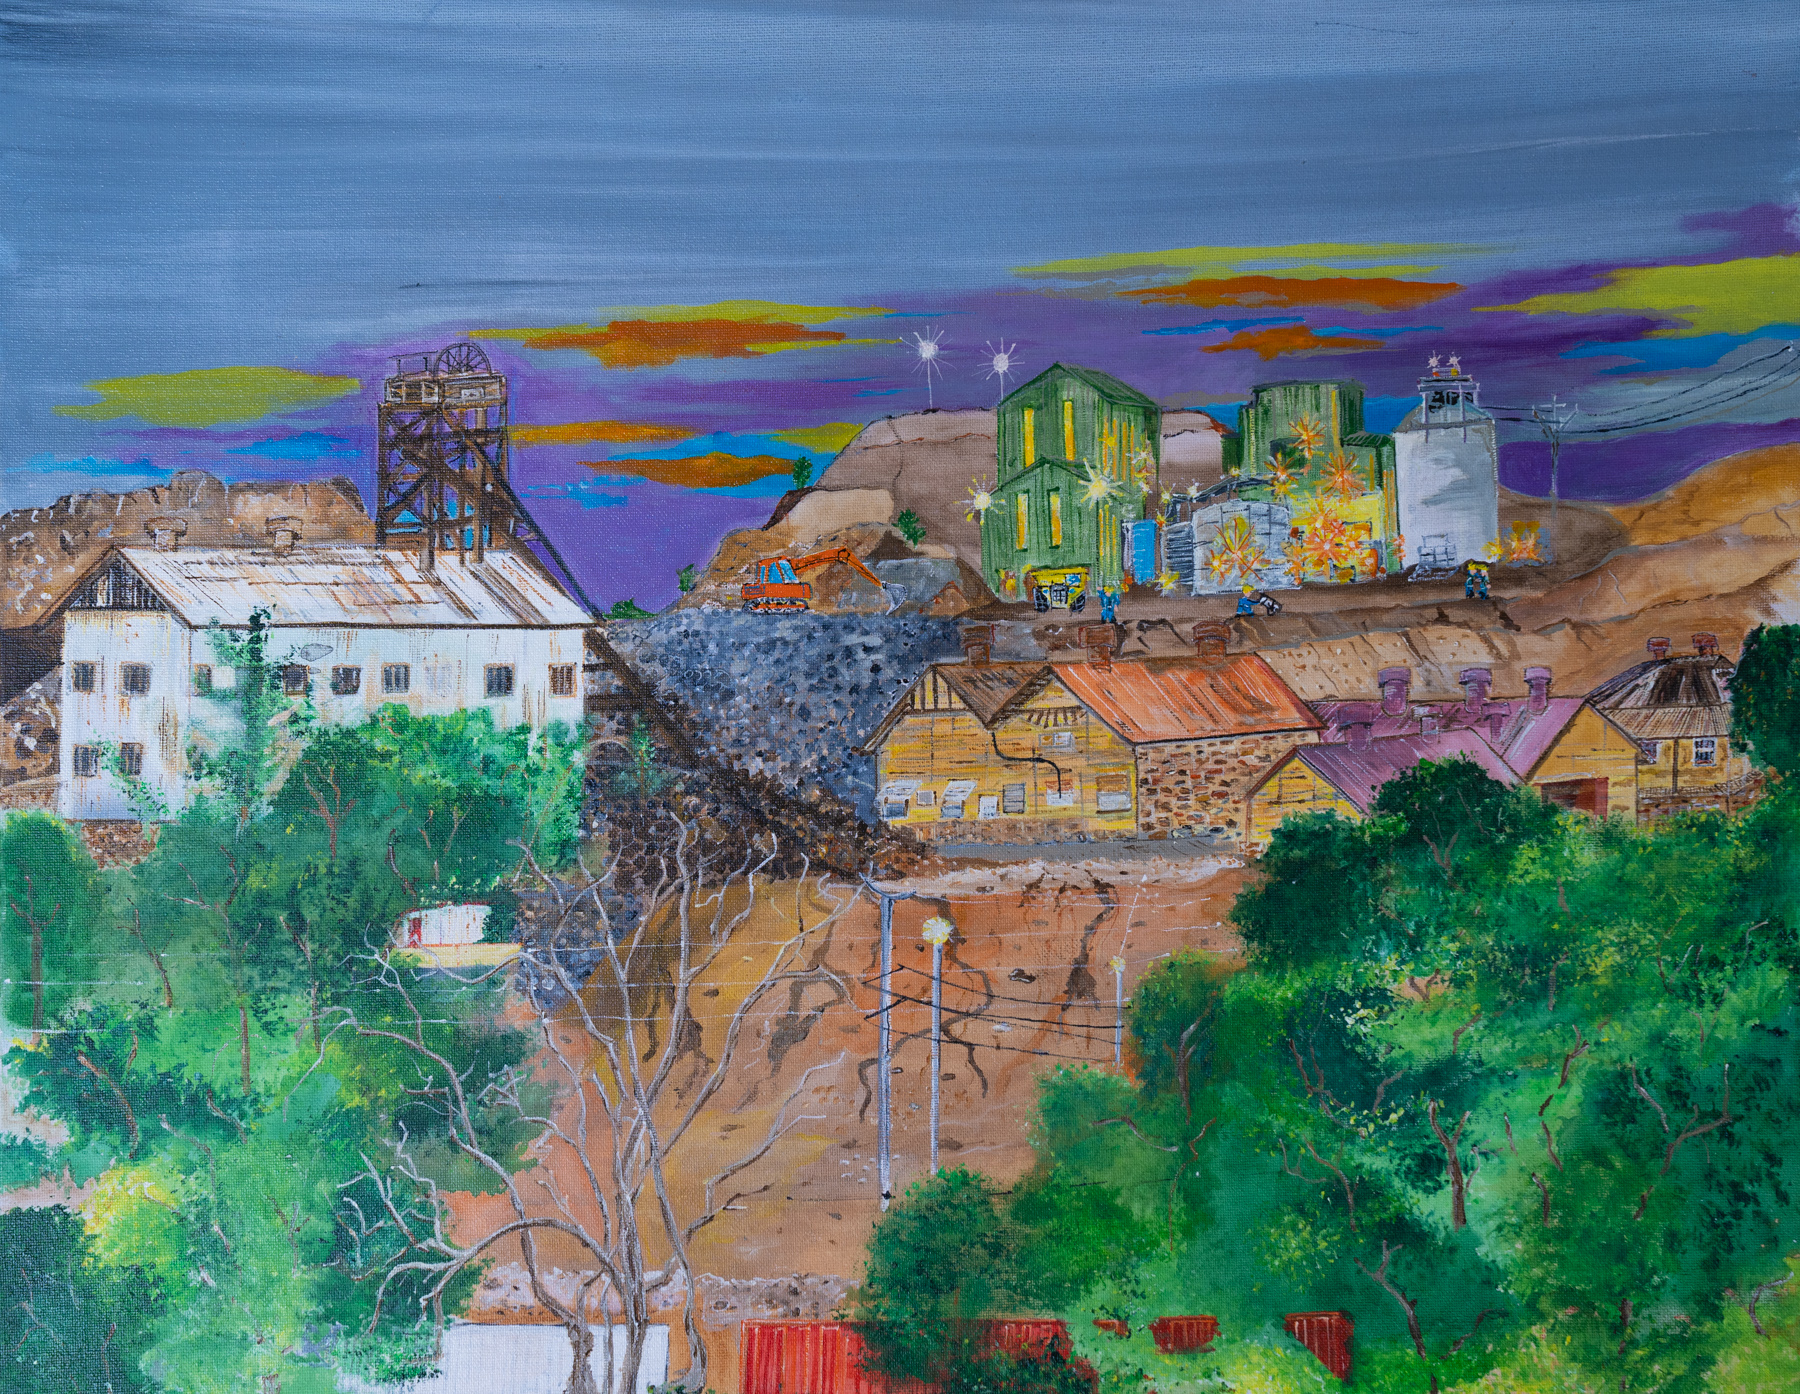 Painting of the mine site at Broken Hill, under a purple sky